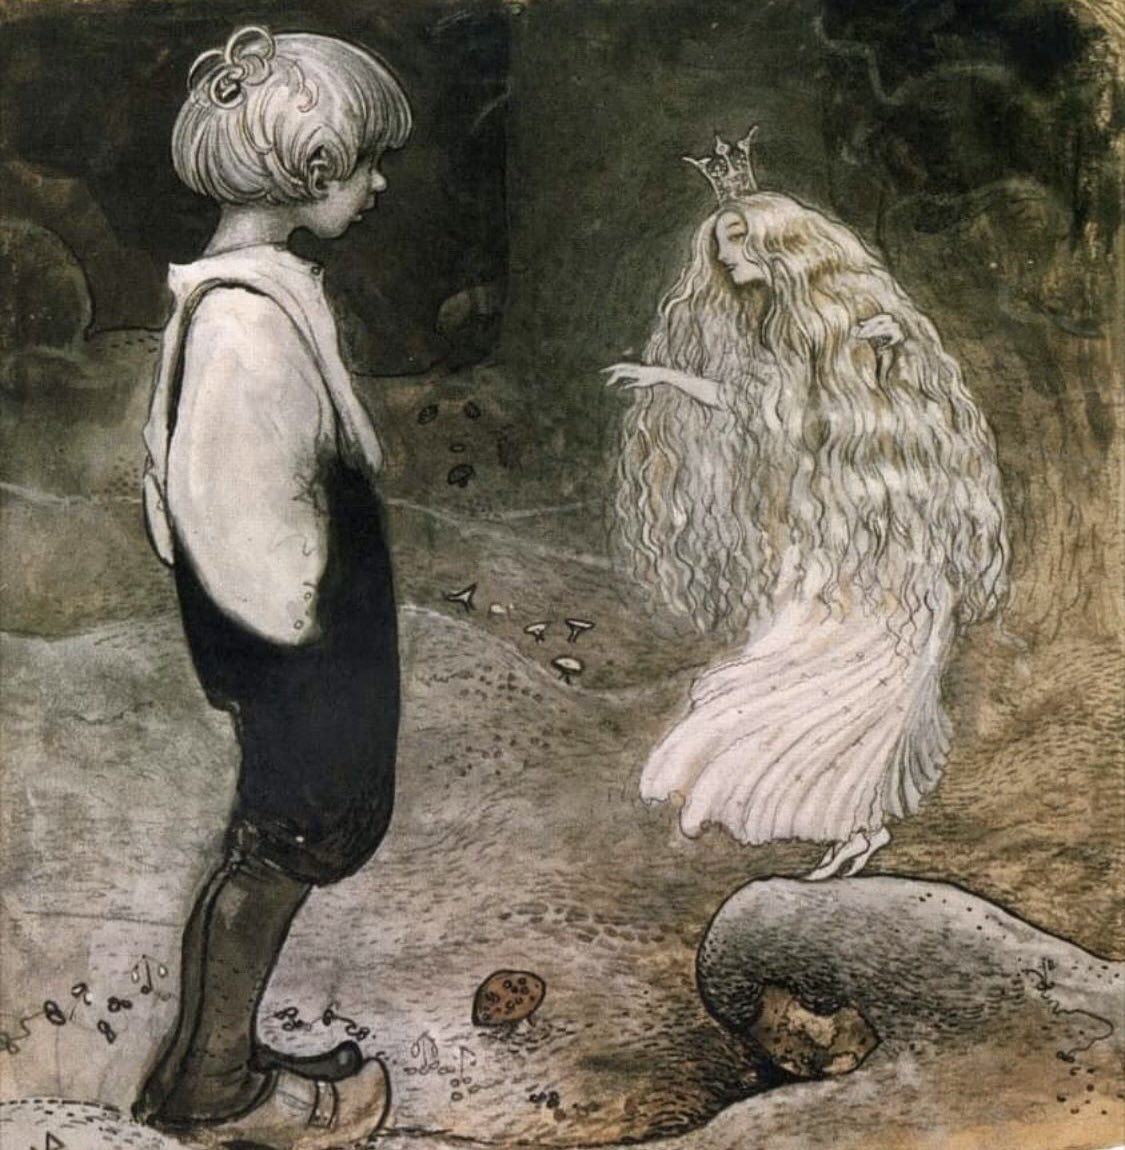 According to Scandinavian folklore, fairies are shapeshifters that can take on various guises. Sometimes they take the form of insects or frogs, and other times they appear as a white mist hovering above the meadow. They can also be invisible.

#FolkloreSunday